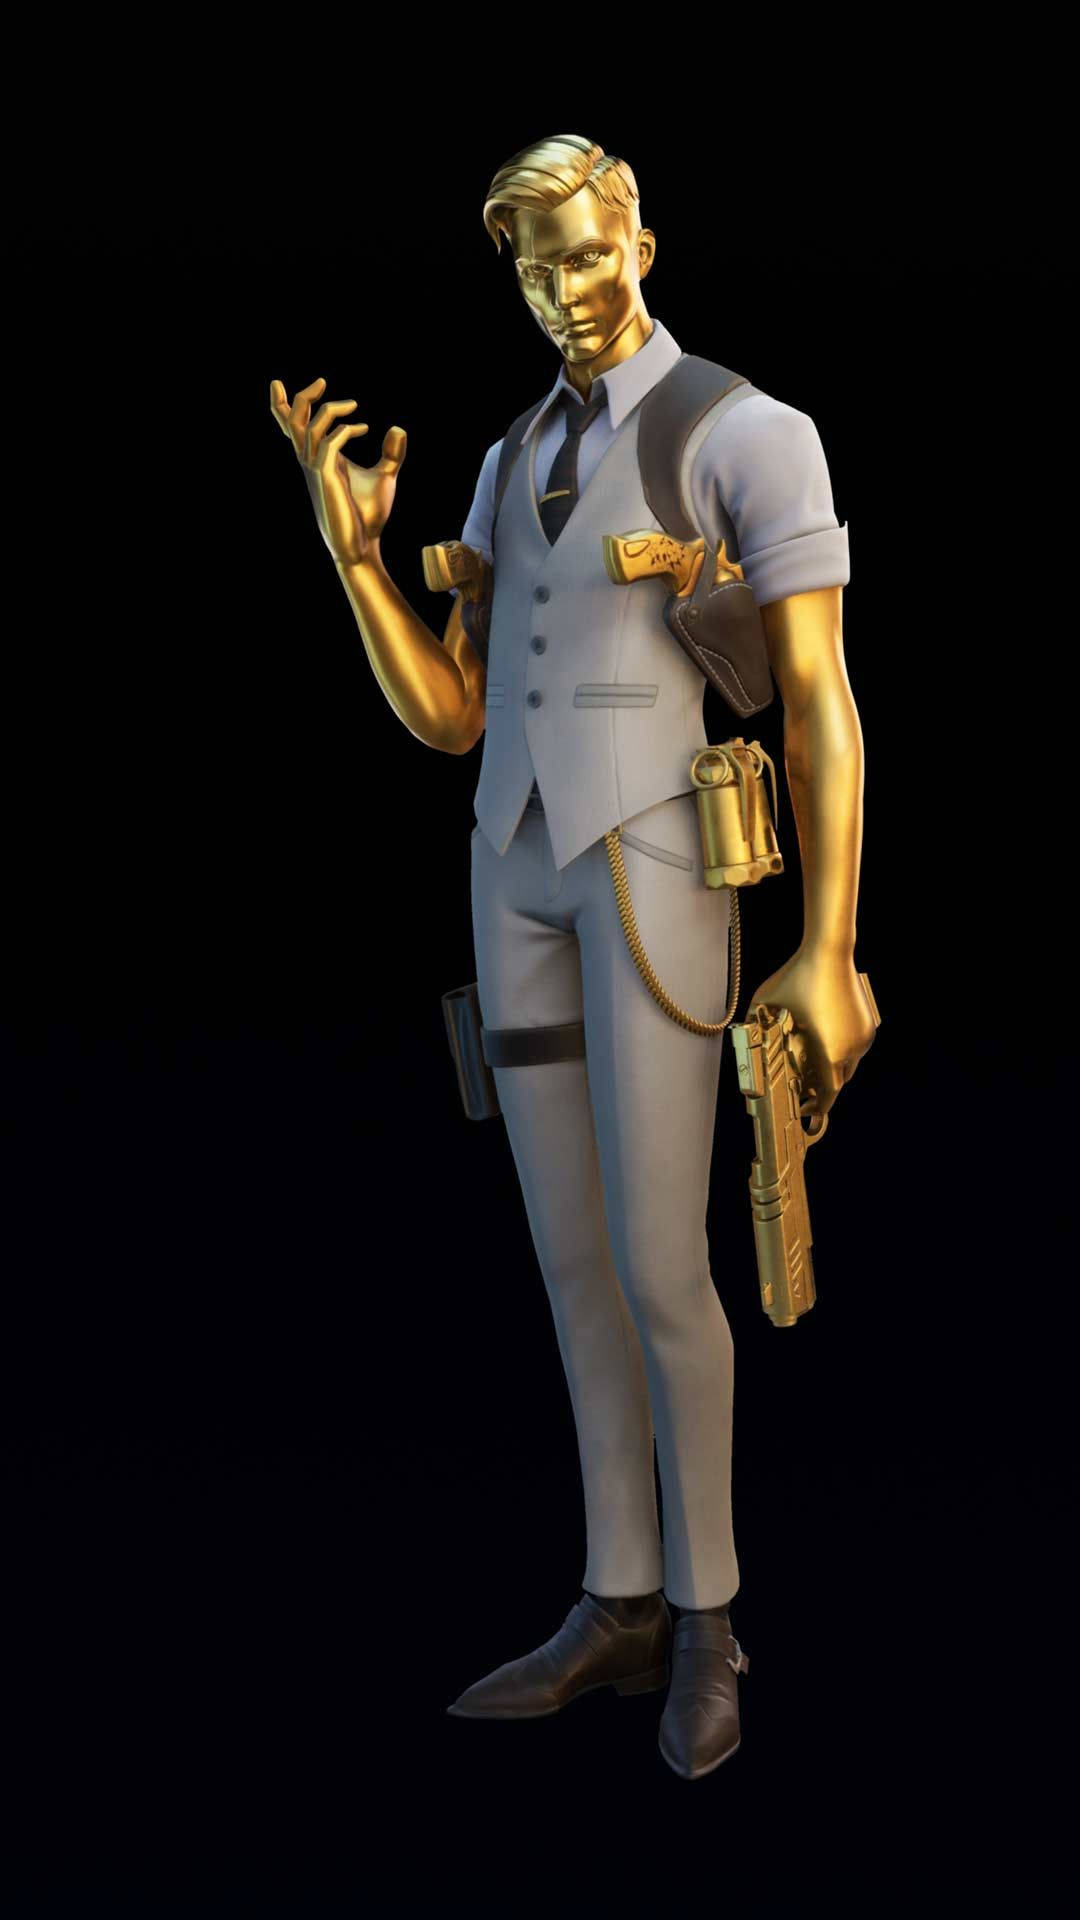 Introducing the Midas Fortnite Skin – Get a Golden Touch in the Battle Royale Wallpaper